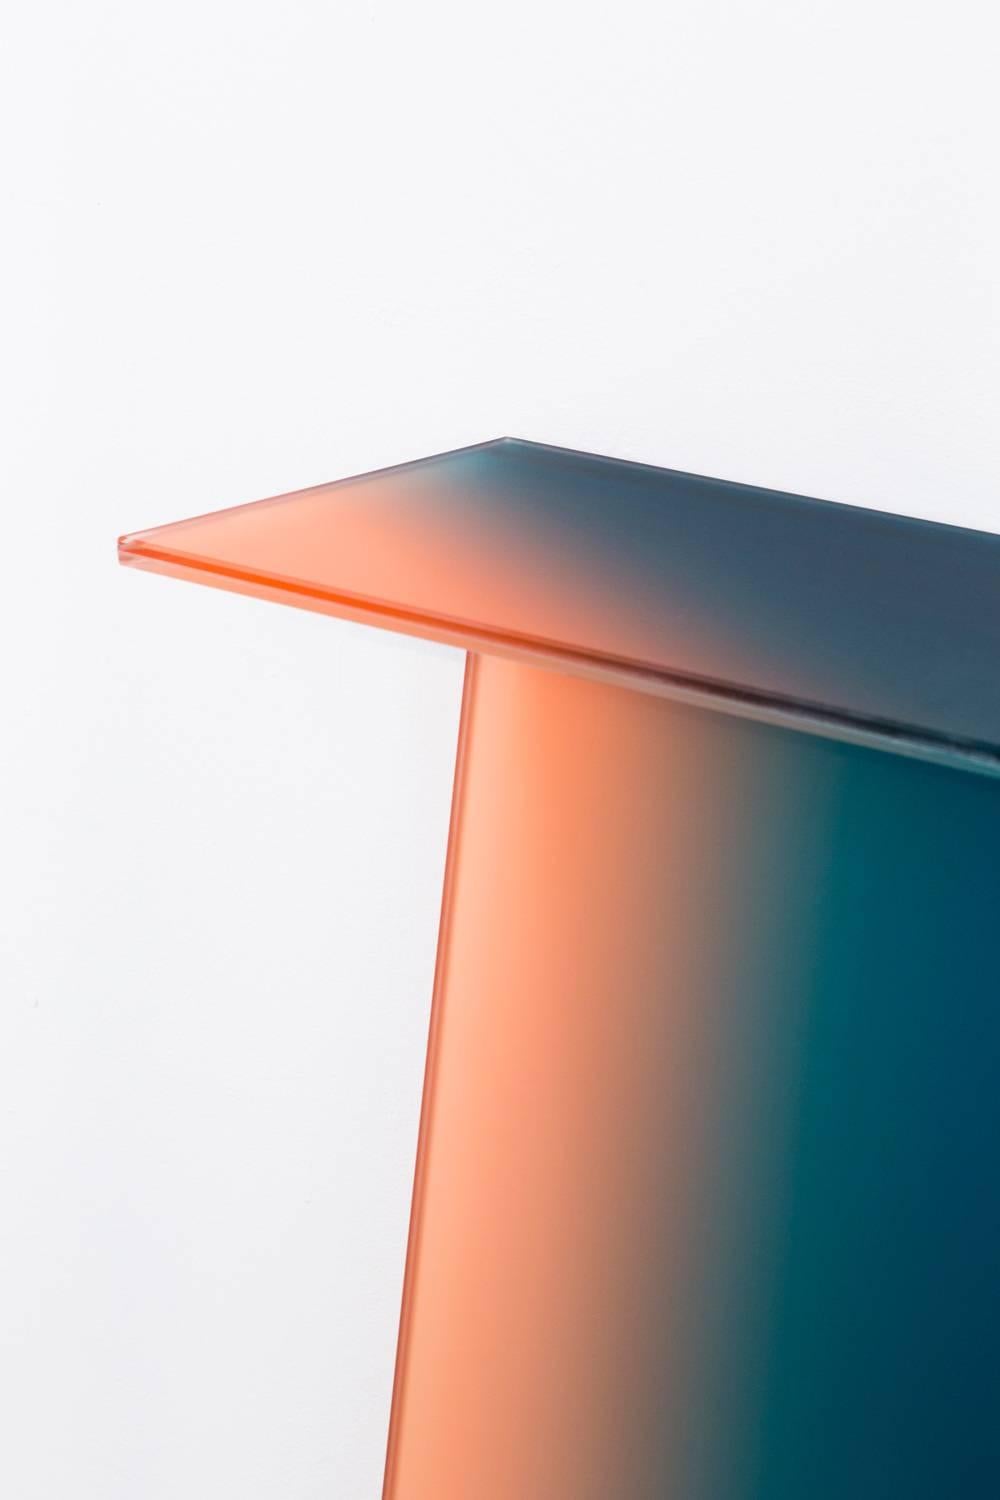 Not So General Gallery in Los Angeles is proud to present the Ombre Console by Amsterdam-based designer Germans Ermics whose recent exploration with material, color and shape has culminated in a collection of glass furniture which is intended to